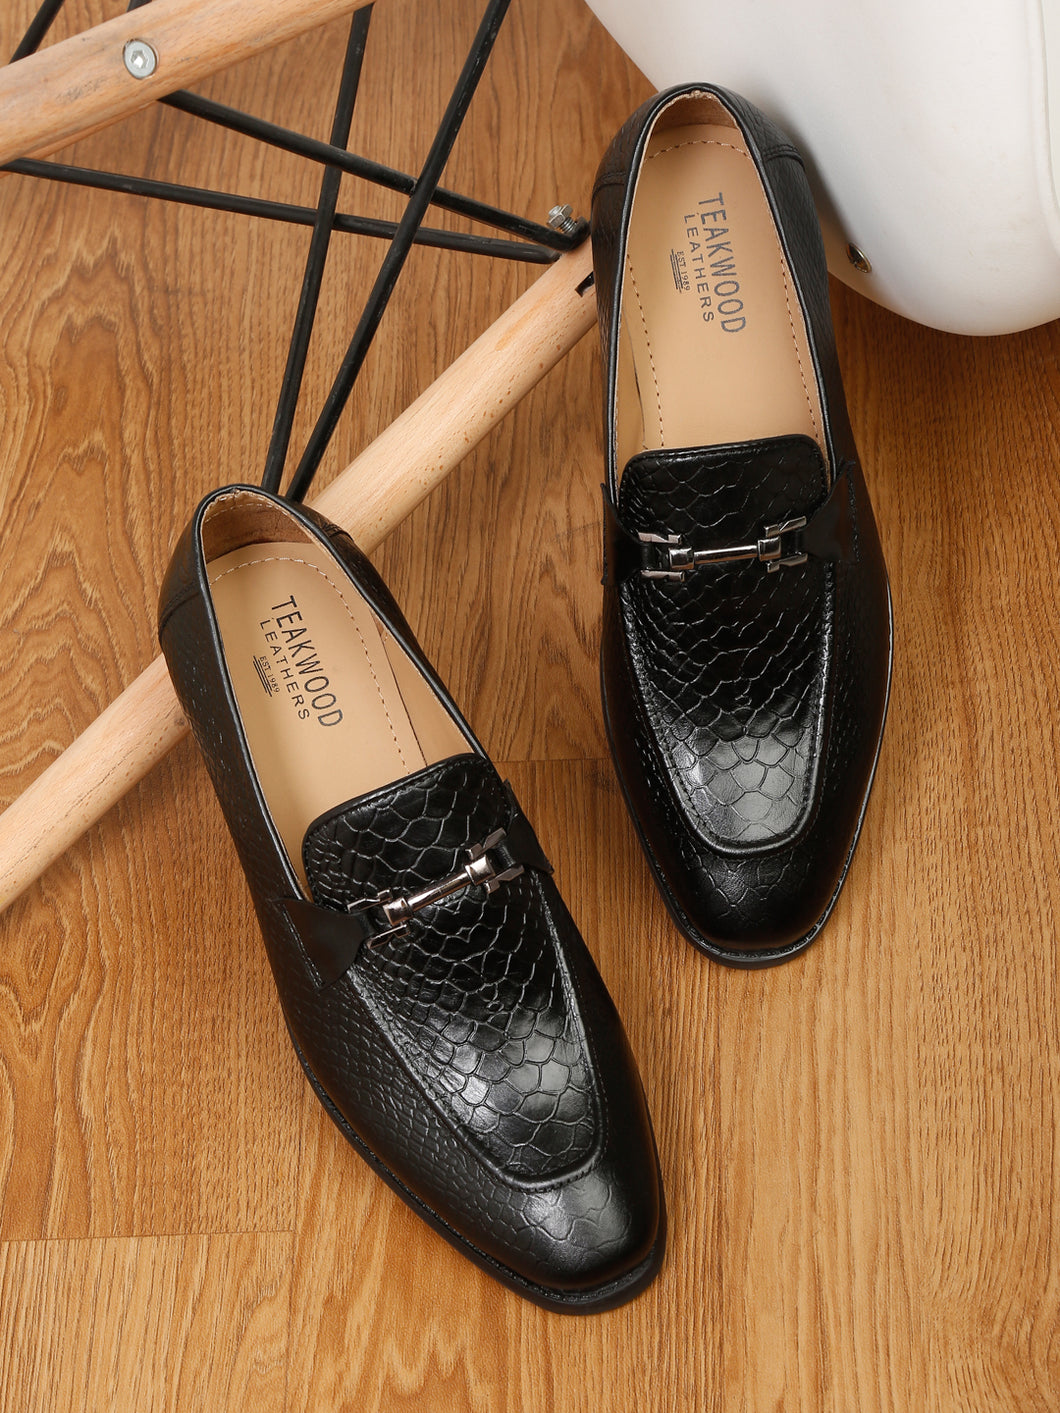  Black Loafer with Square Toe